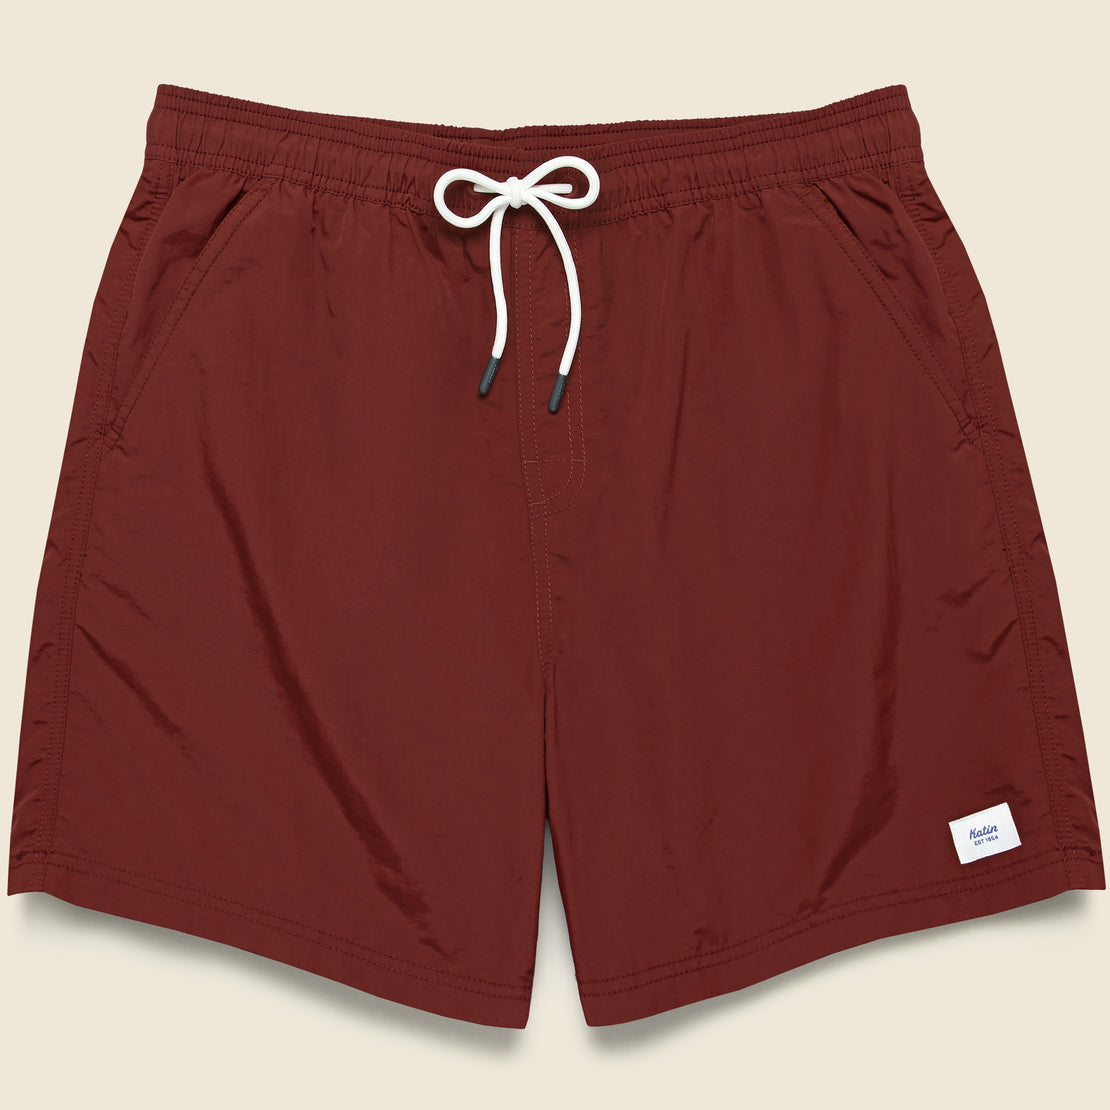 Katin Poolside Volley Trunk - Port